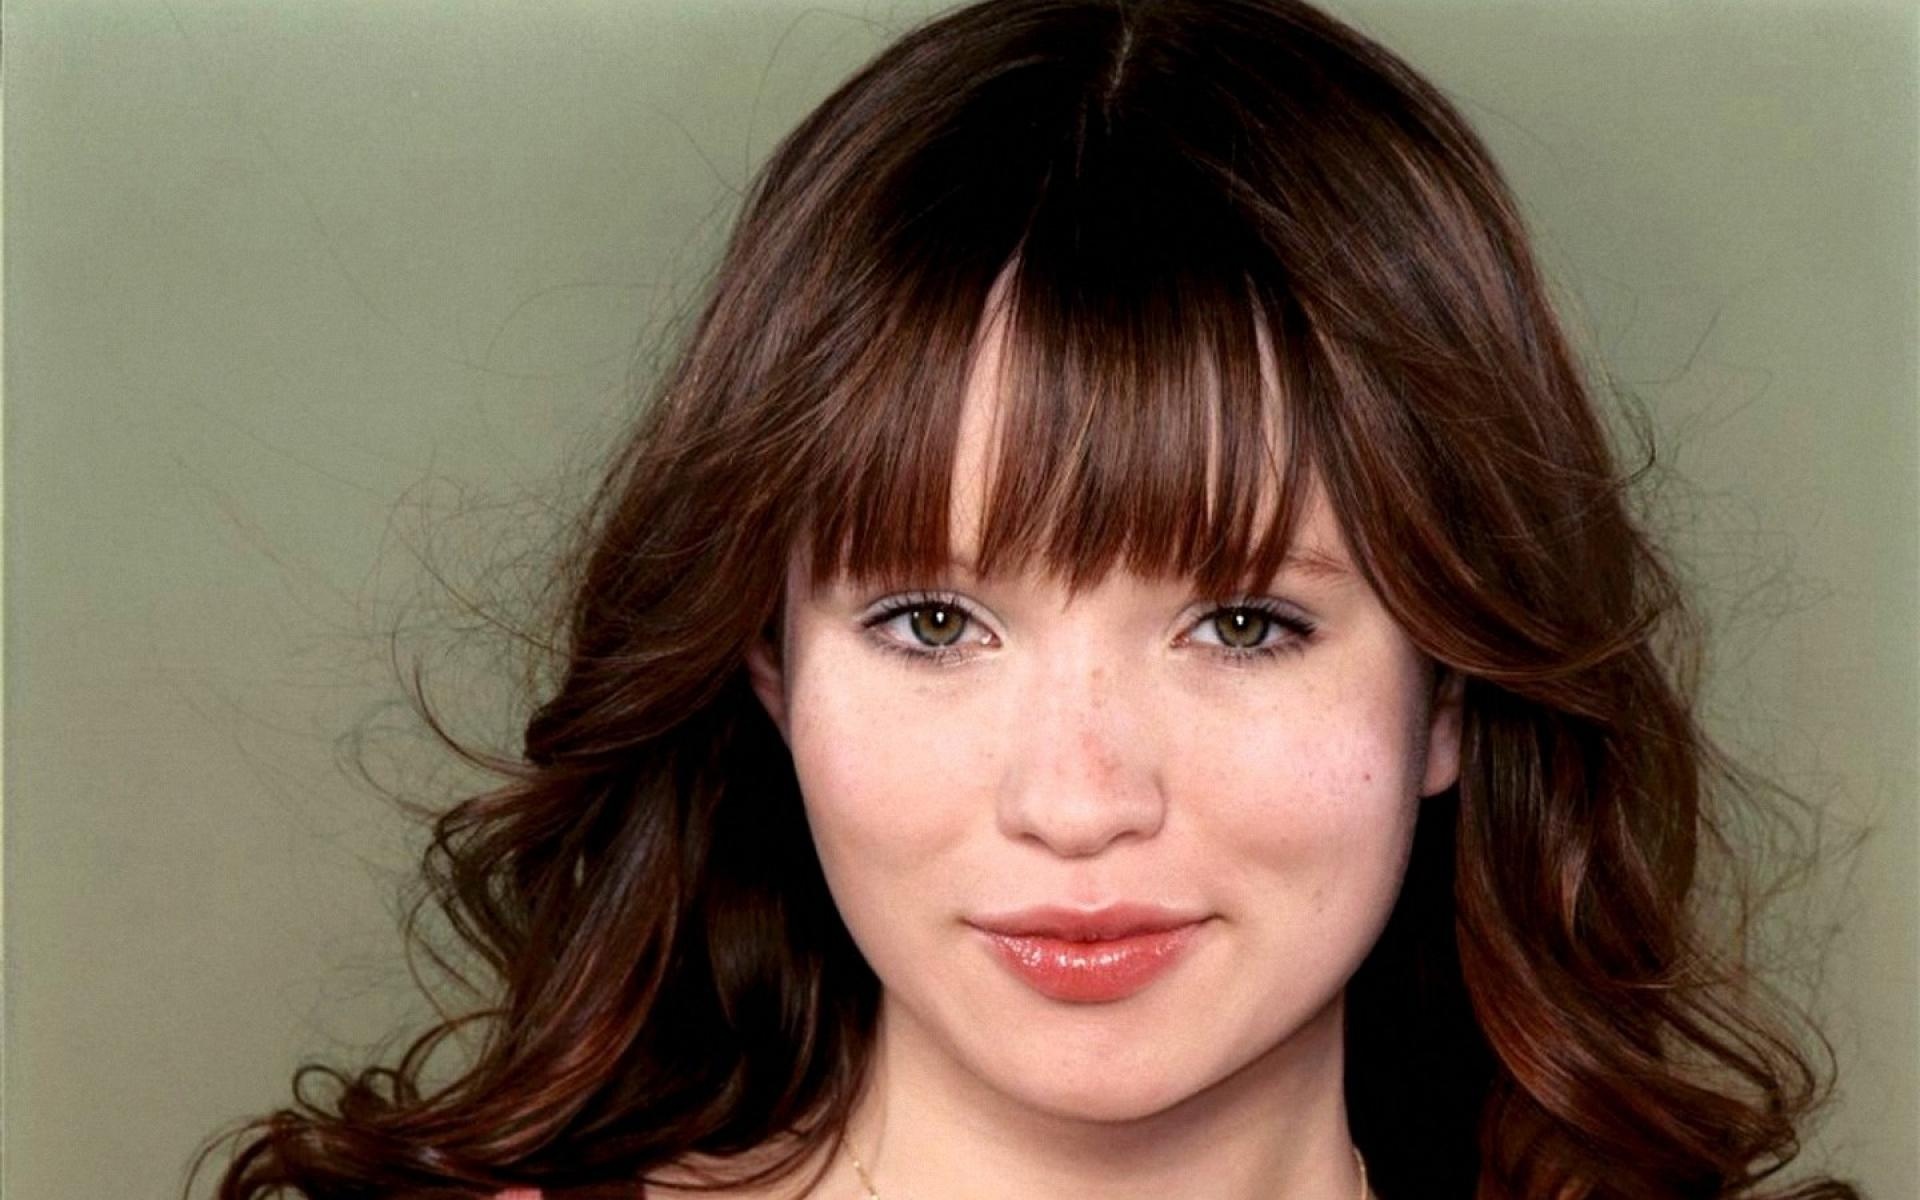 Emily Browning wallpapers, High resolution, Quality download, Stunning collection, 1920x1200 HD Desktop